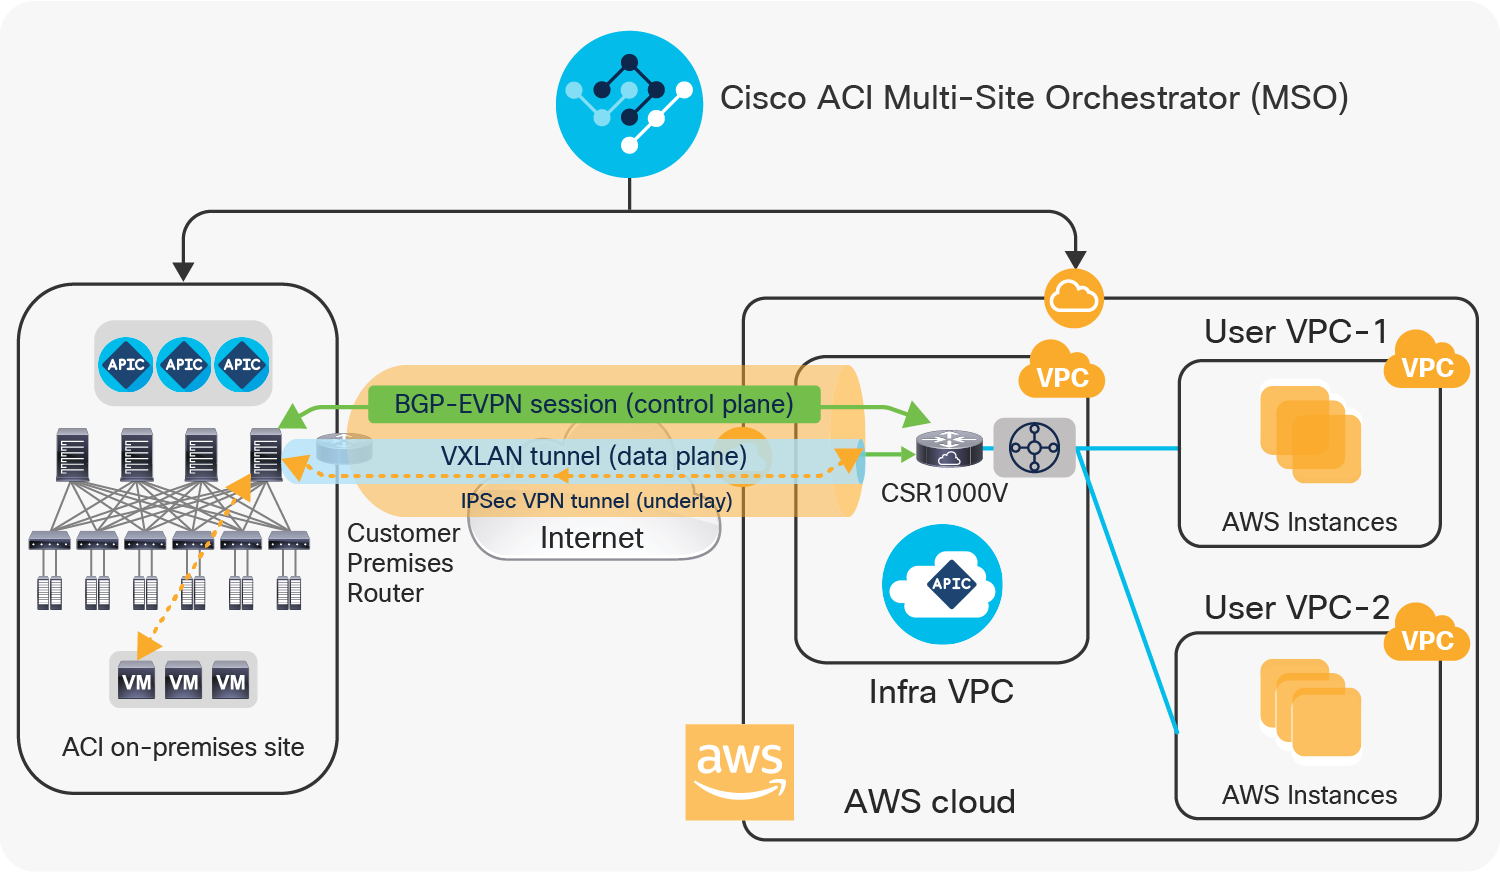 The overlay network between on-premises and cloud sites